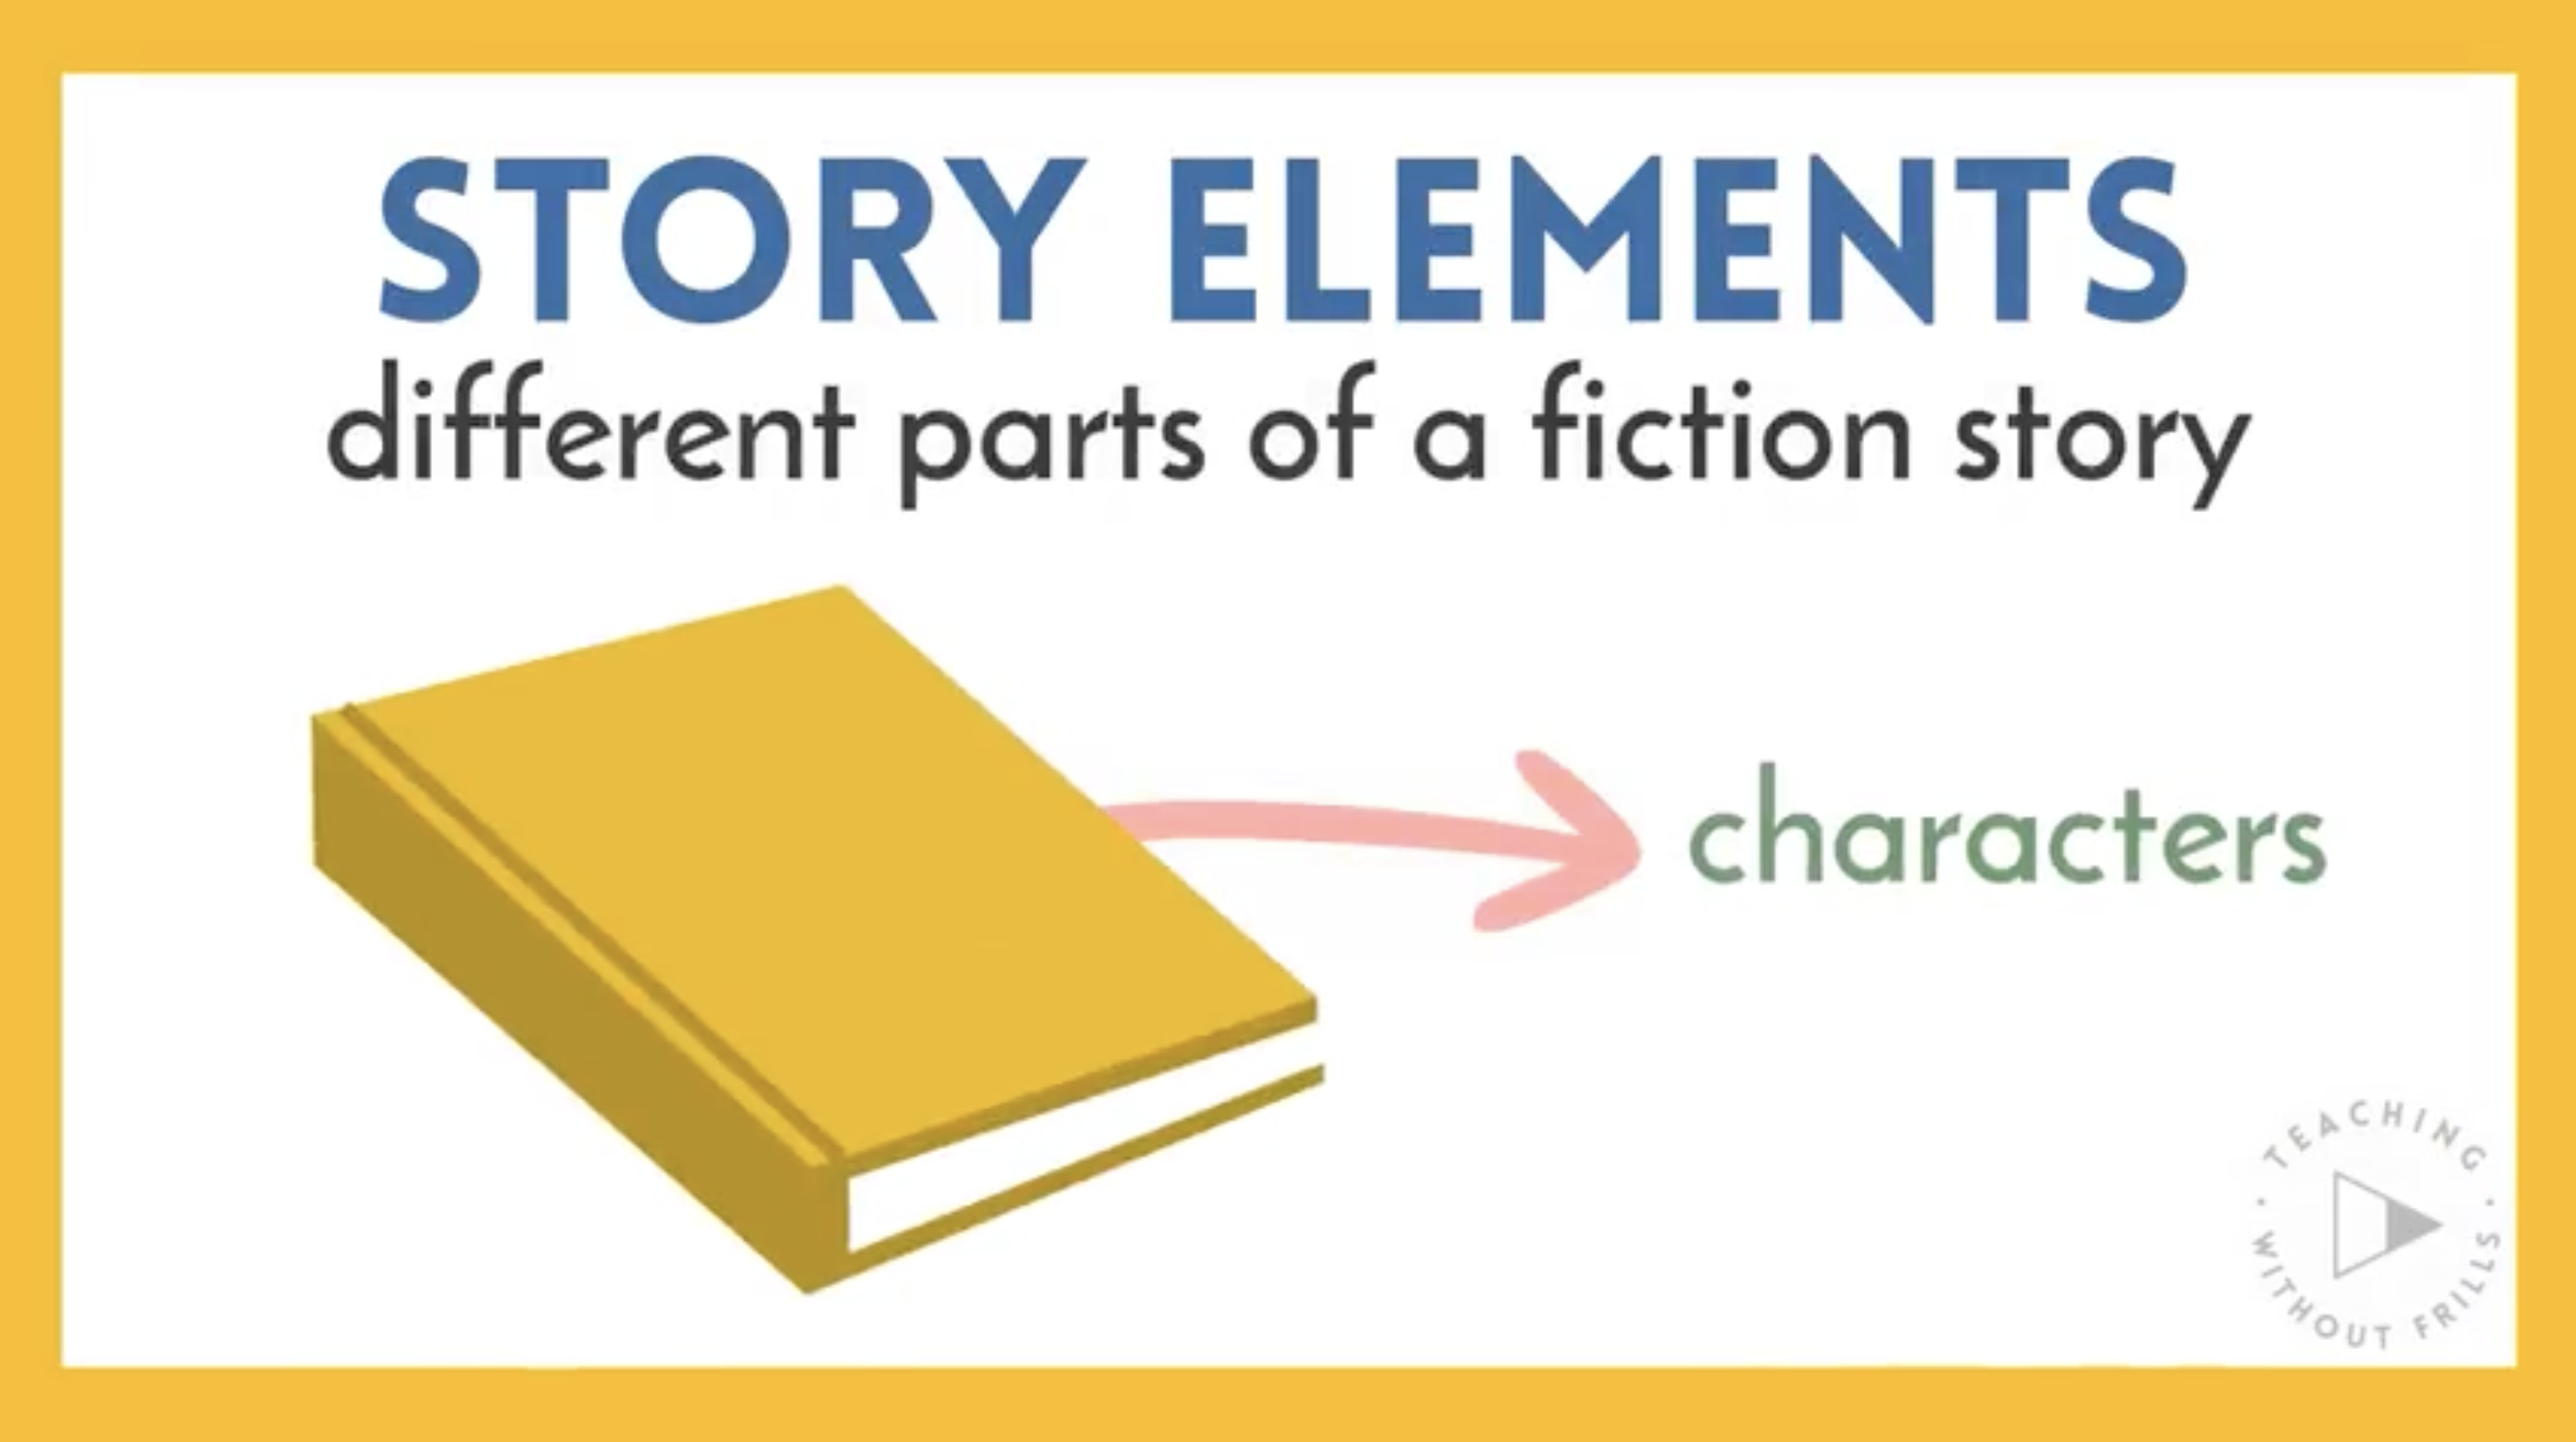 The different parts of a fiction story